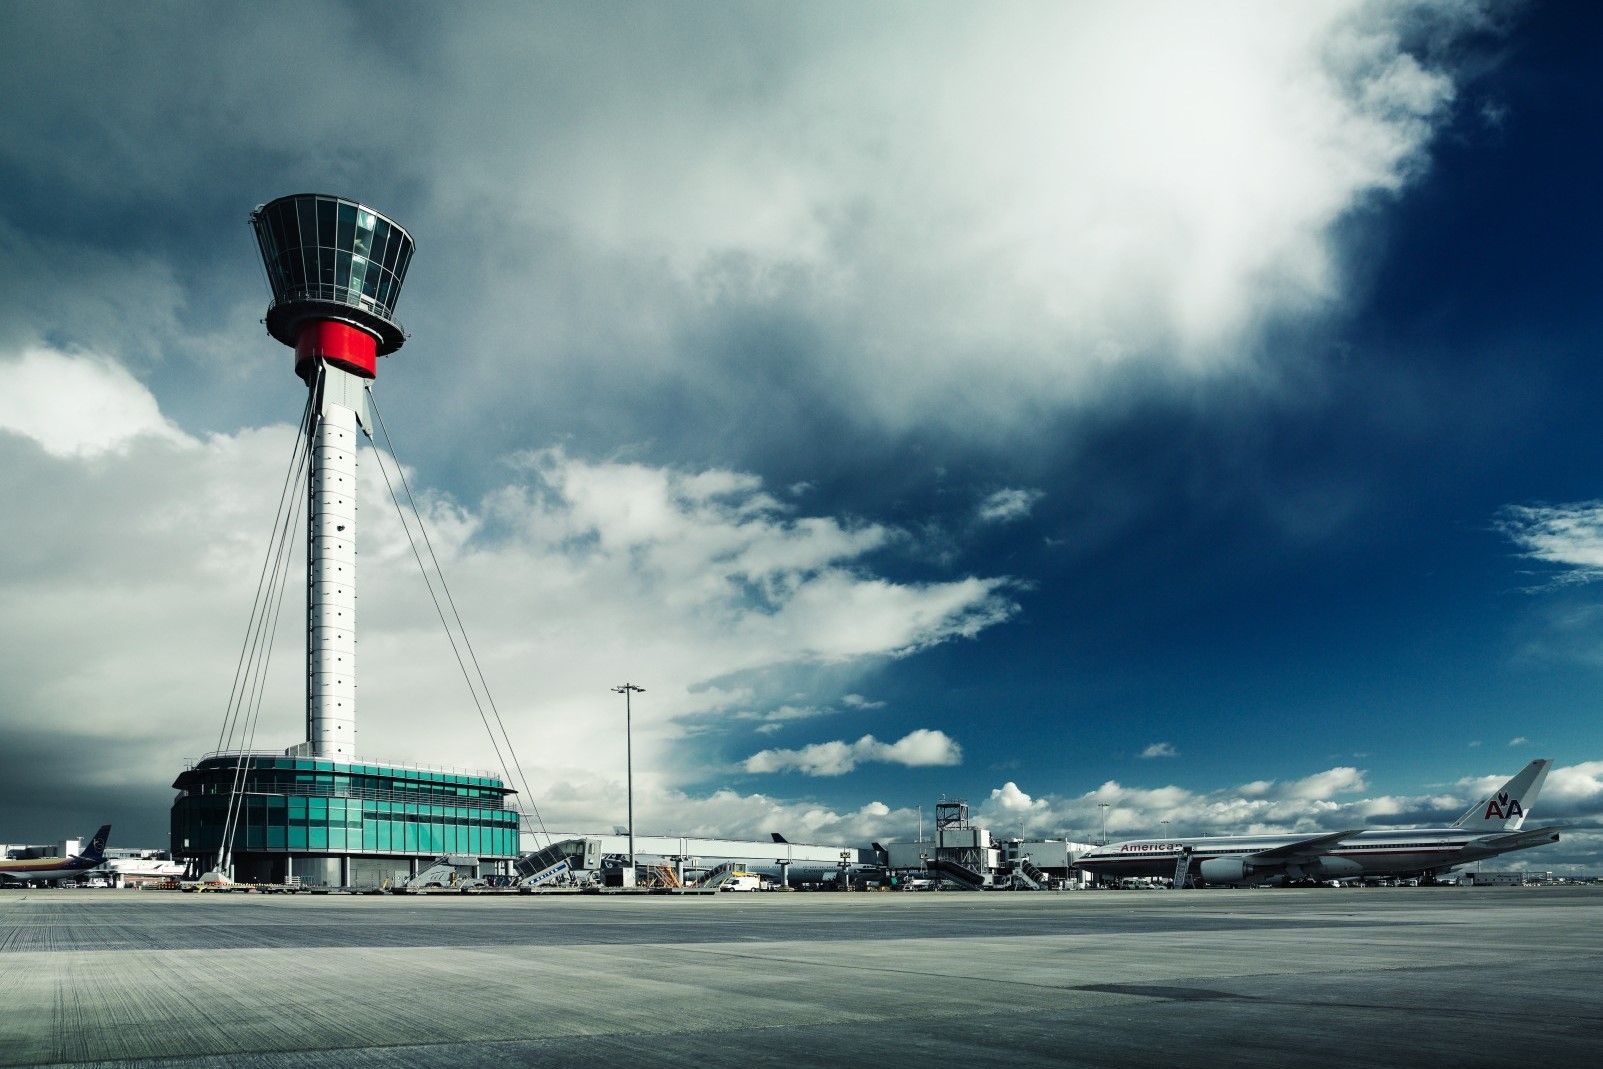 A Panoramic view of London Heathrow Airport with its Air Traffic Control Tower prominently in the view.